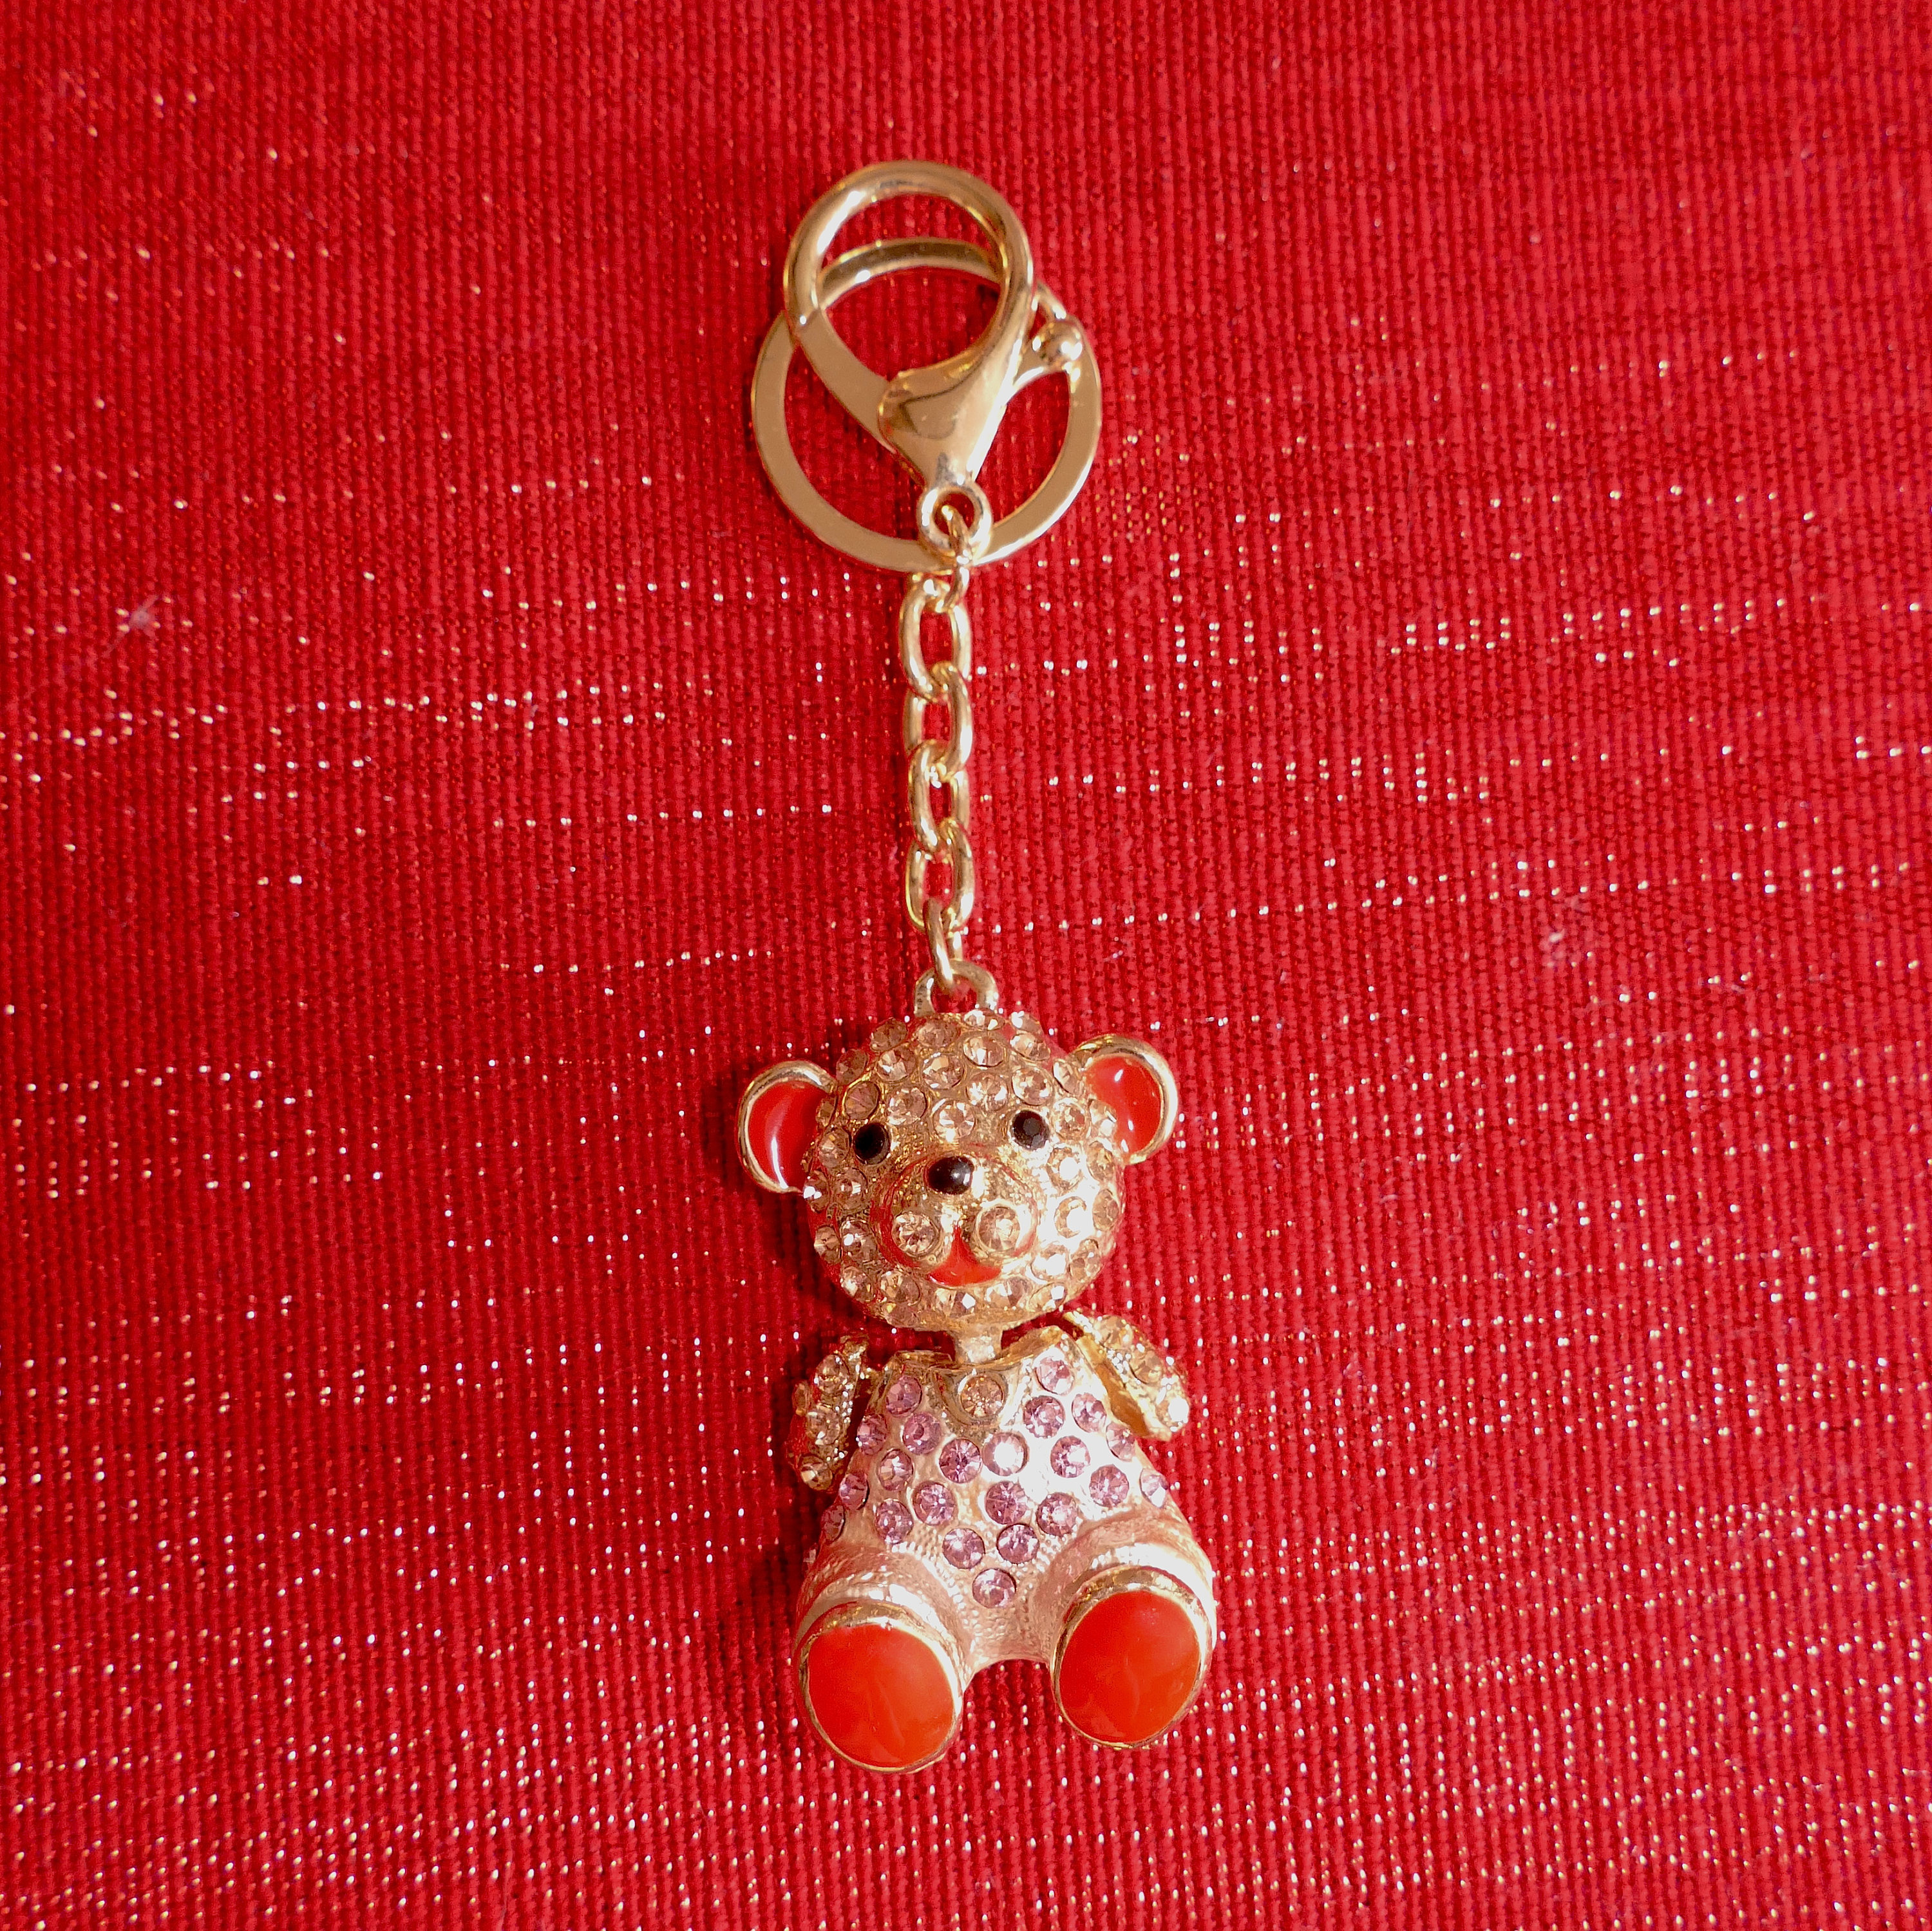 Clothing & Accessories :: Keychains & Lanyards :: Resin Teddy Bear Keychain,  Gift Ideas, Resin, Resin Art, Keychain, Gift For Her, Resin Keyring,  Handmade Gift